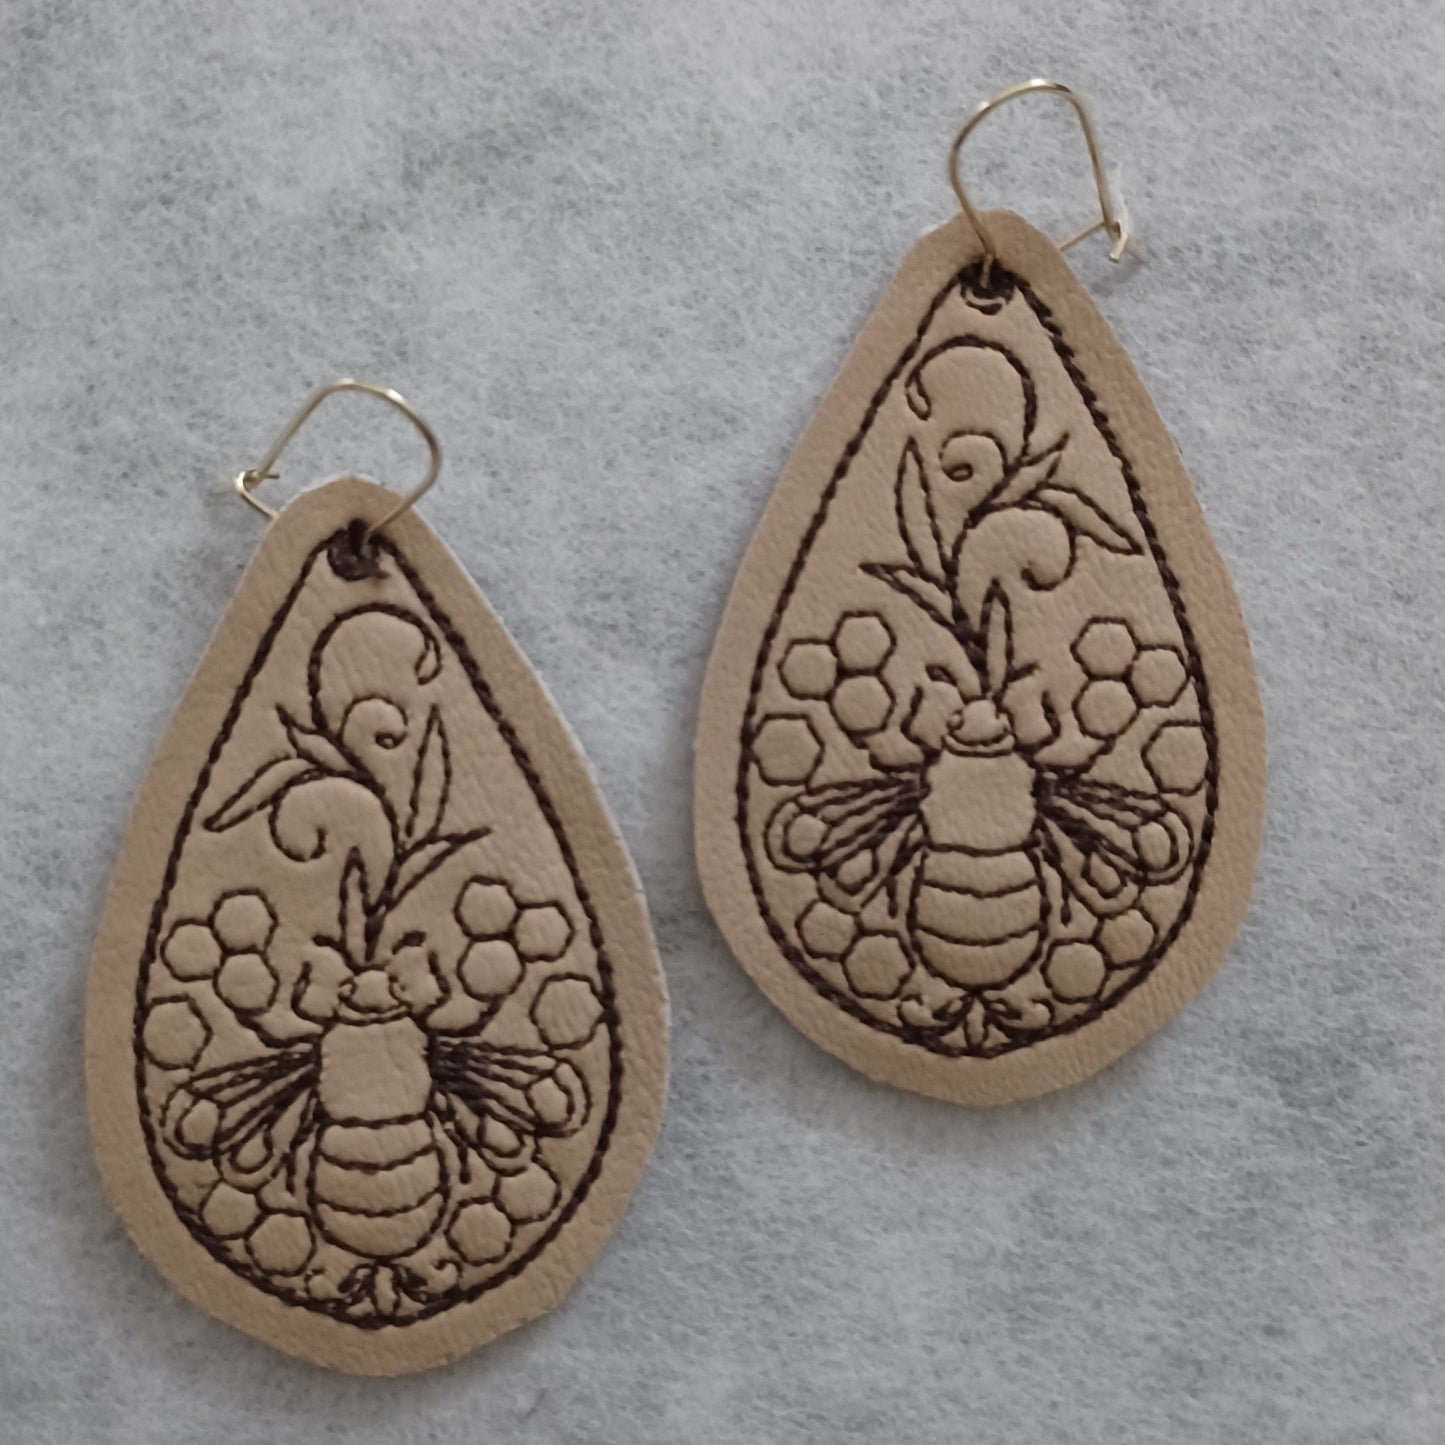 Bumble Bee Embroidered Earrings